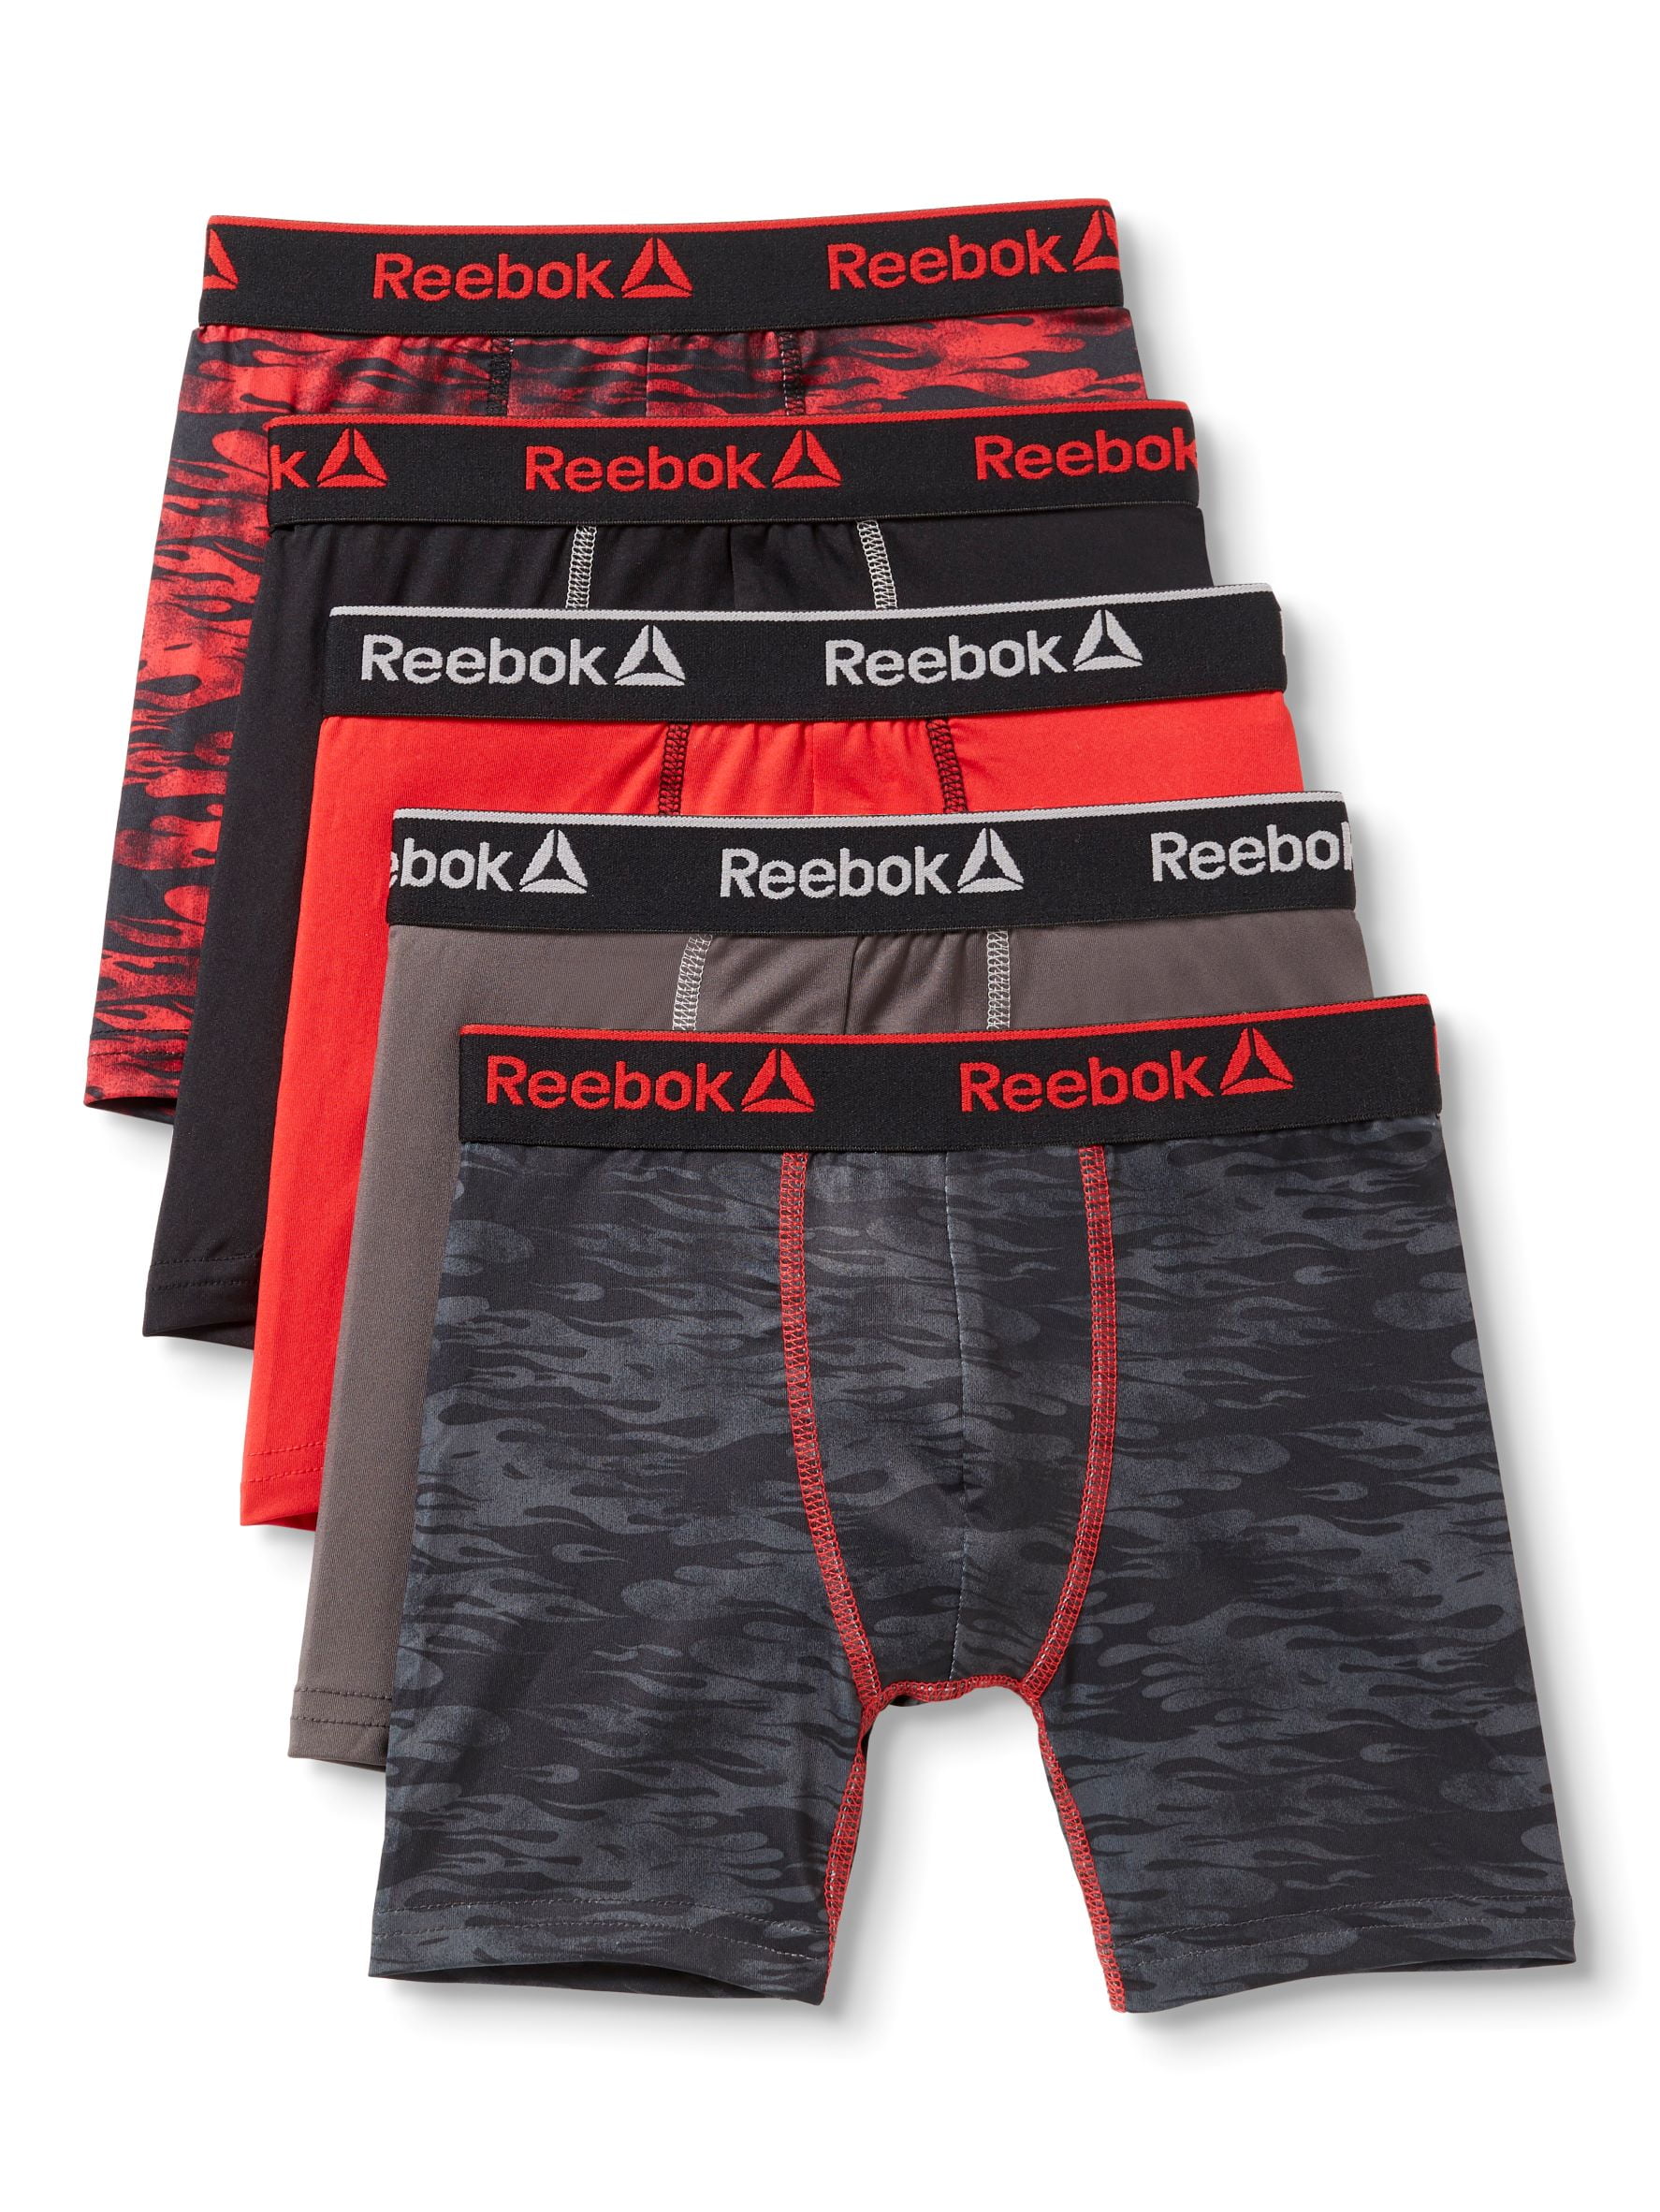 Reebok Boys Performance Quick Dry Compression Long Boxer Brief Pack of 6 